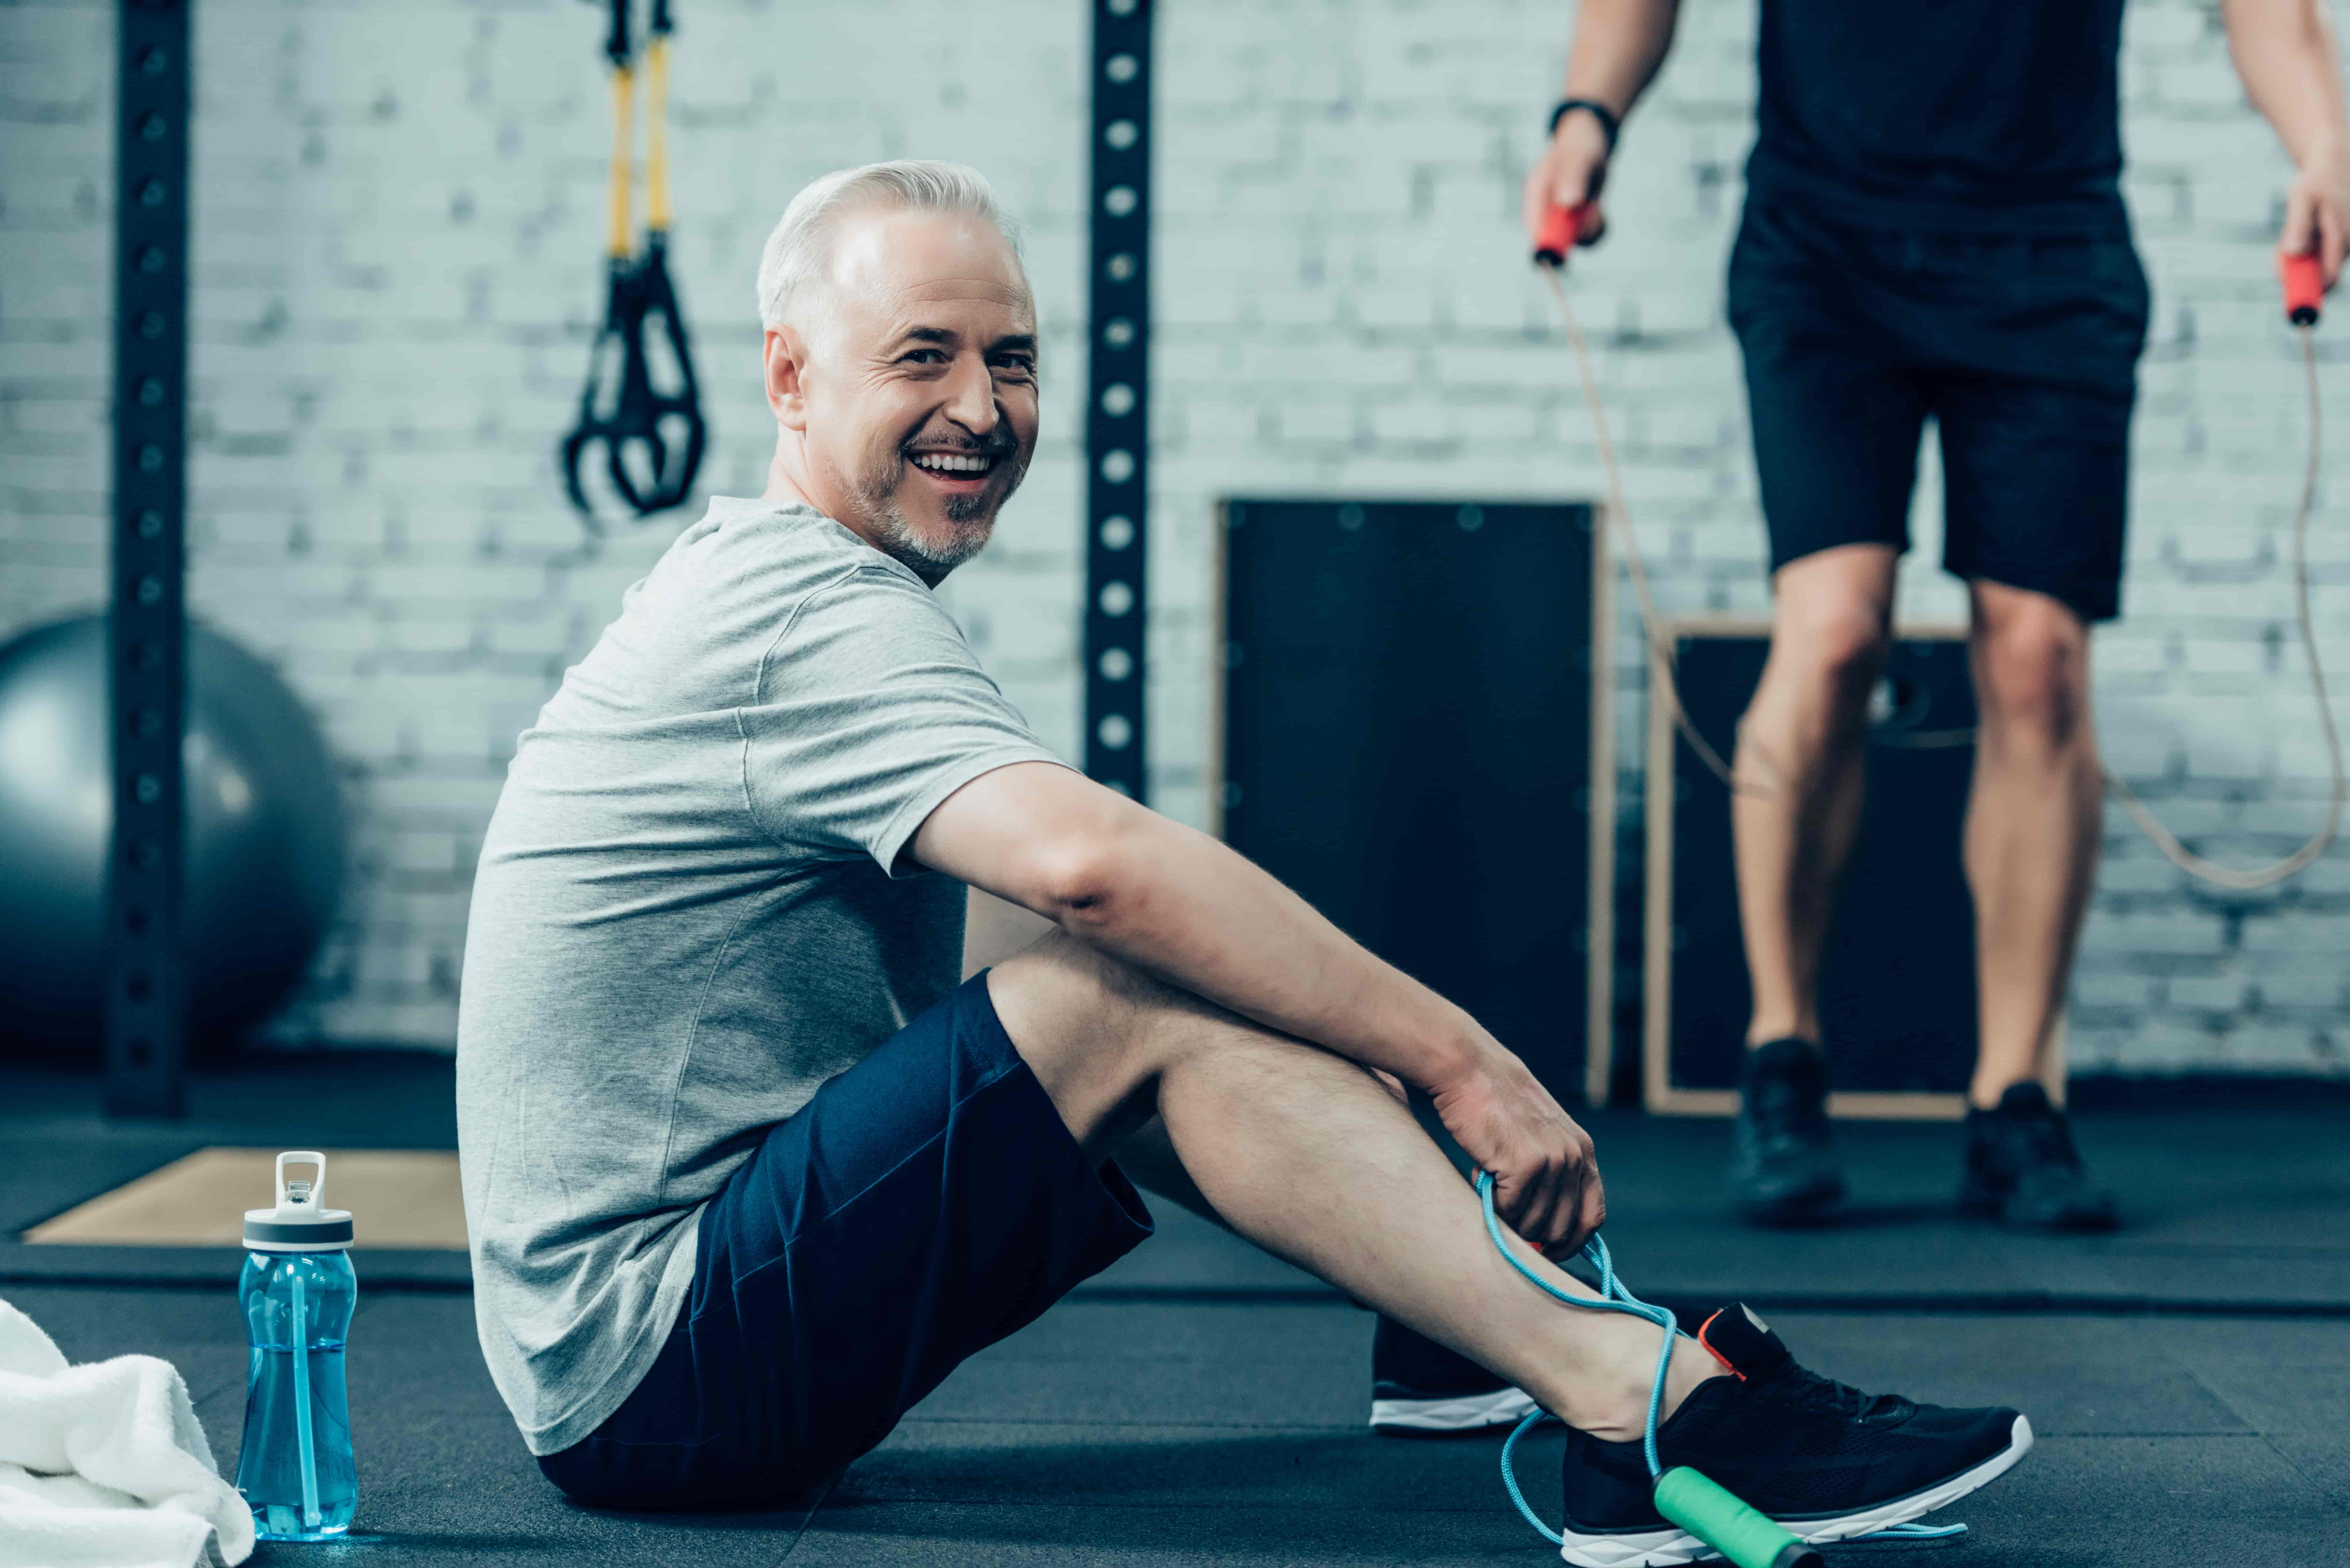 Man smiling as he catches his breath sitting on a gym floor